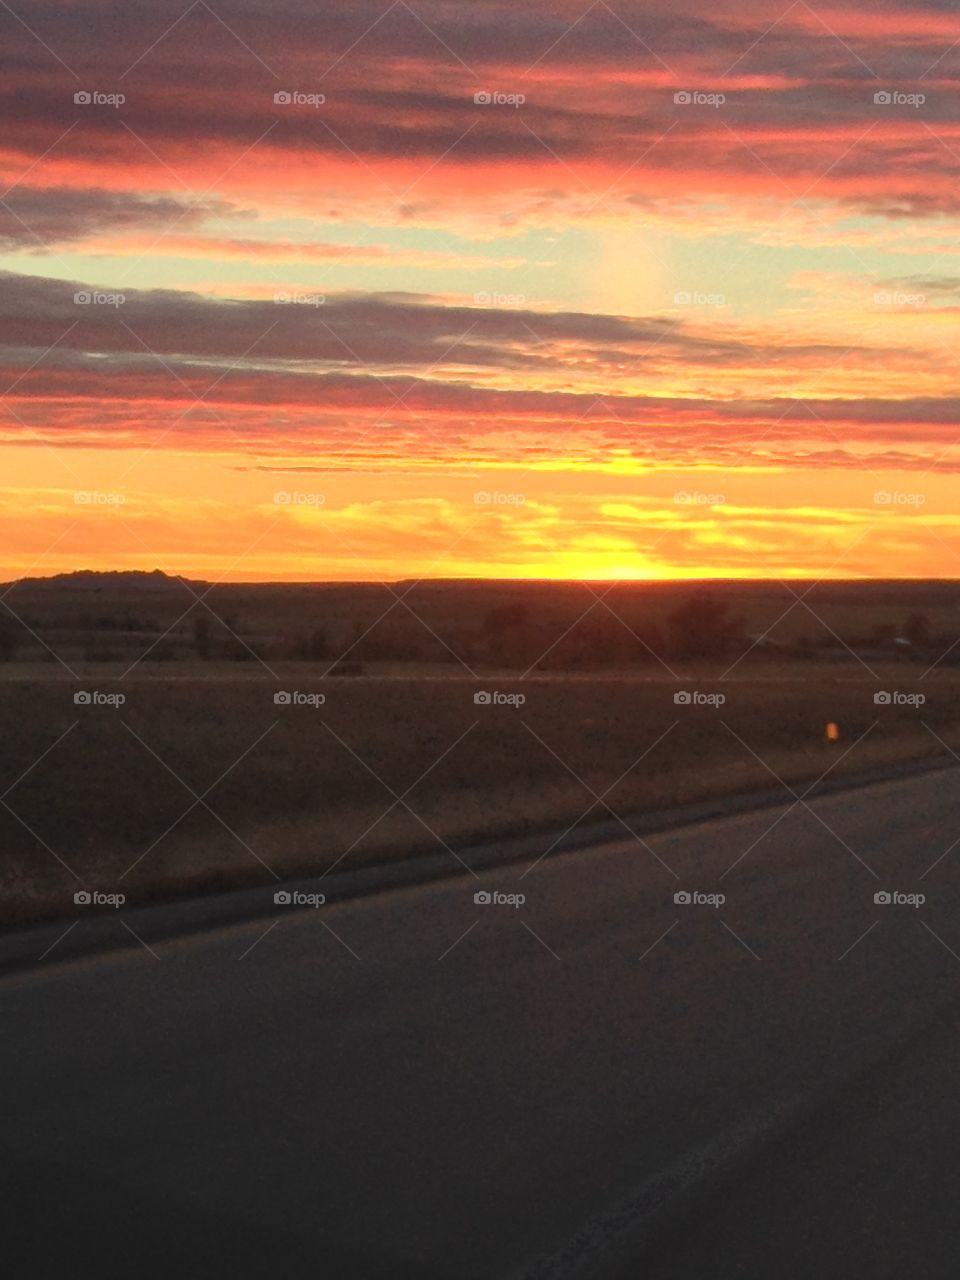 The work commute across the state and not a soul in sight, but South Dakota sunsets never disappoint. 